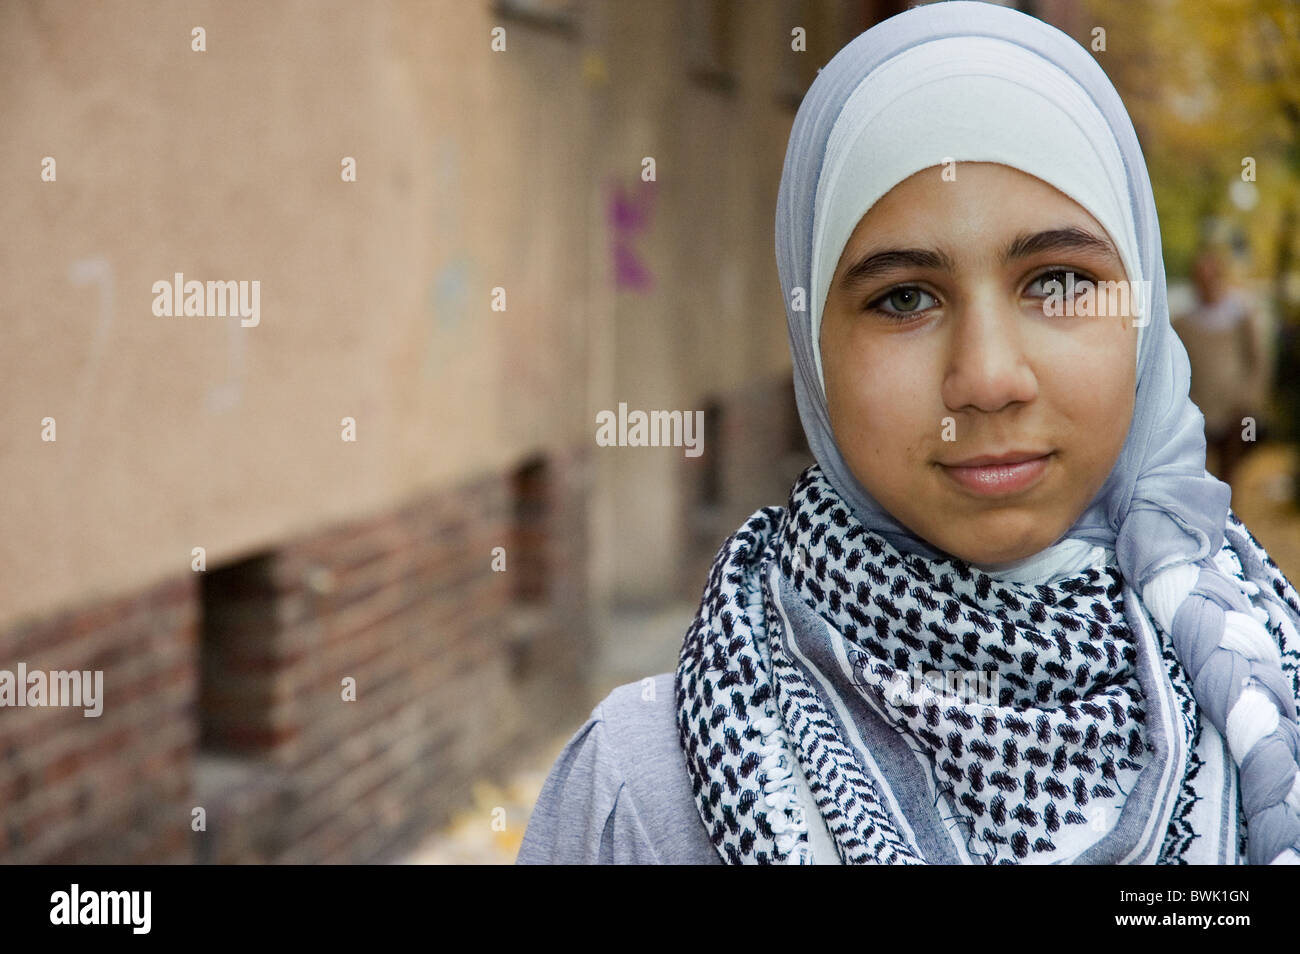 A young girl wearing a headscarf, Berlin, Germany Stock Photo